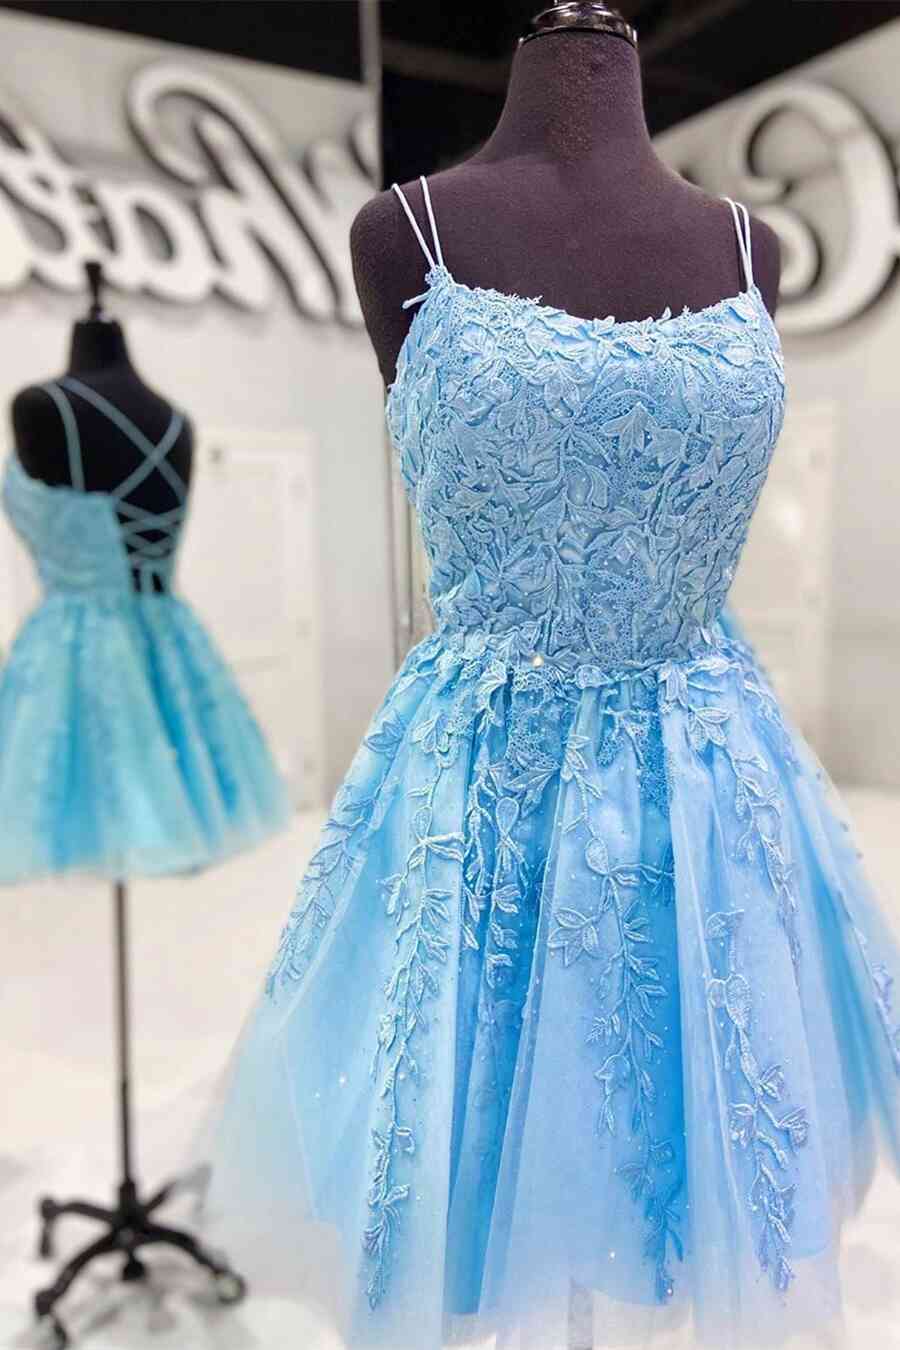 Prom Dresses Styles, Straps Lace Applique Blue Homecoming Dress,Fuchsia Cocktail Dresses